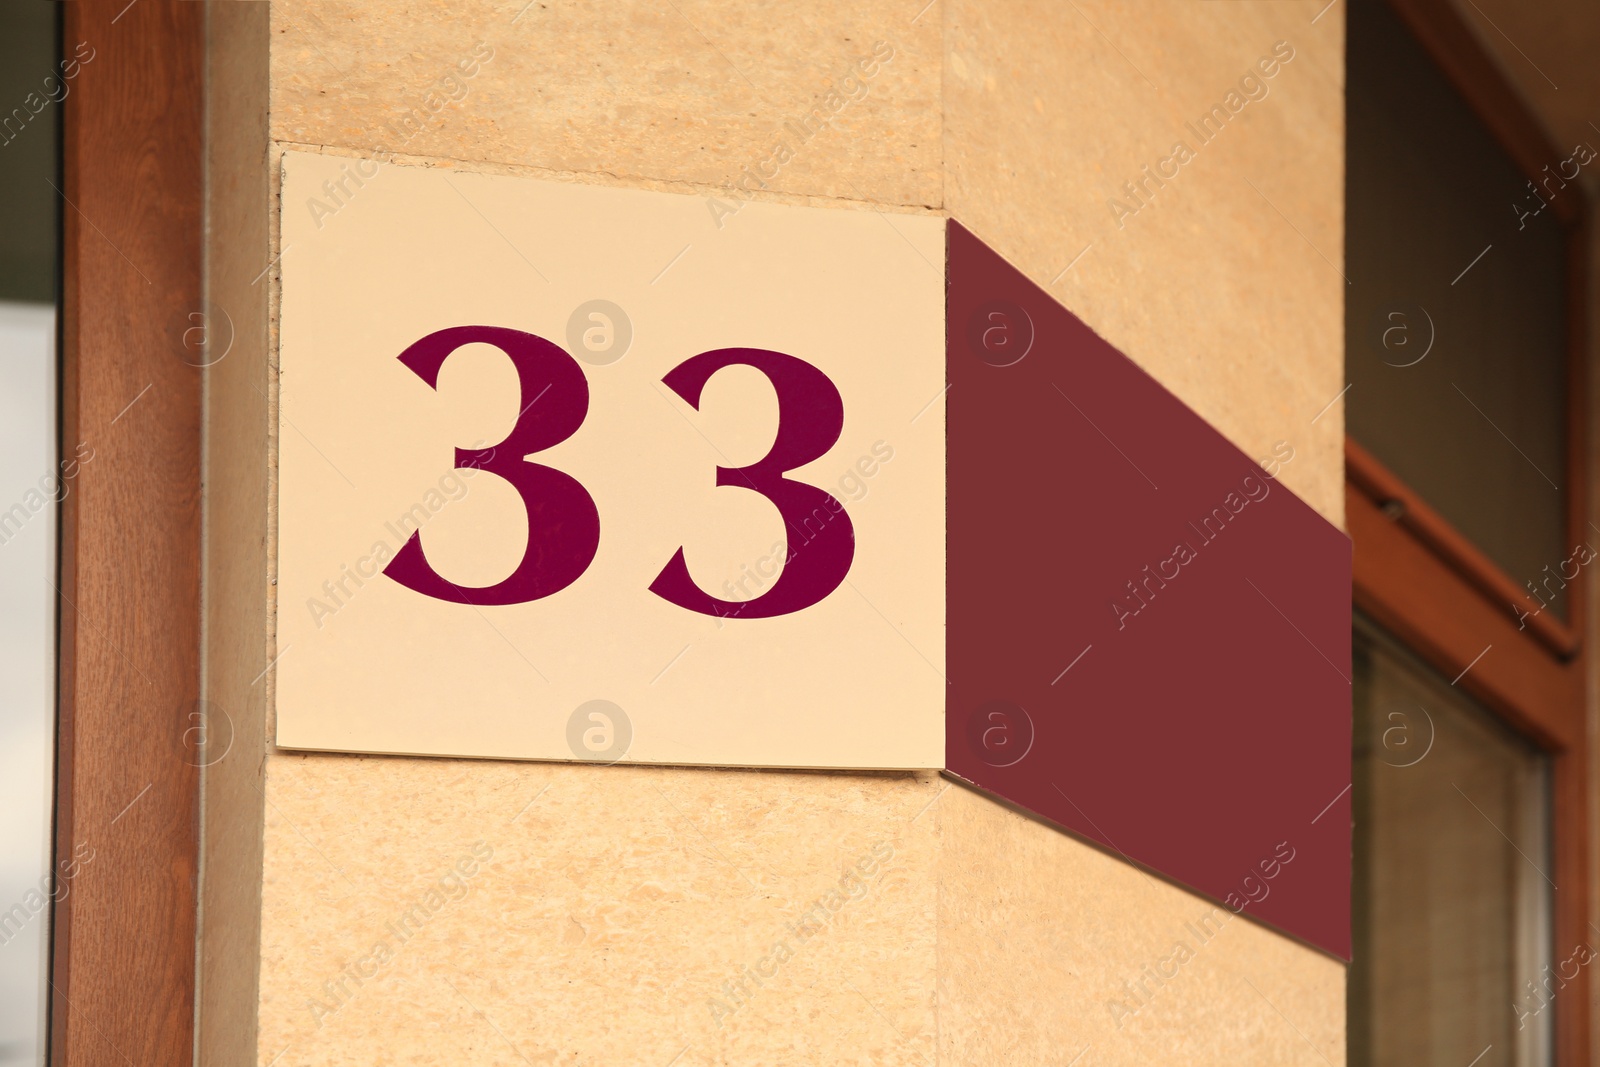 Photo of House number 33 on beige wall outdoors, low angle view